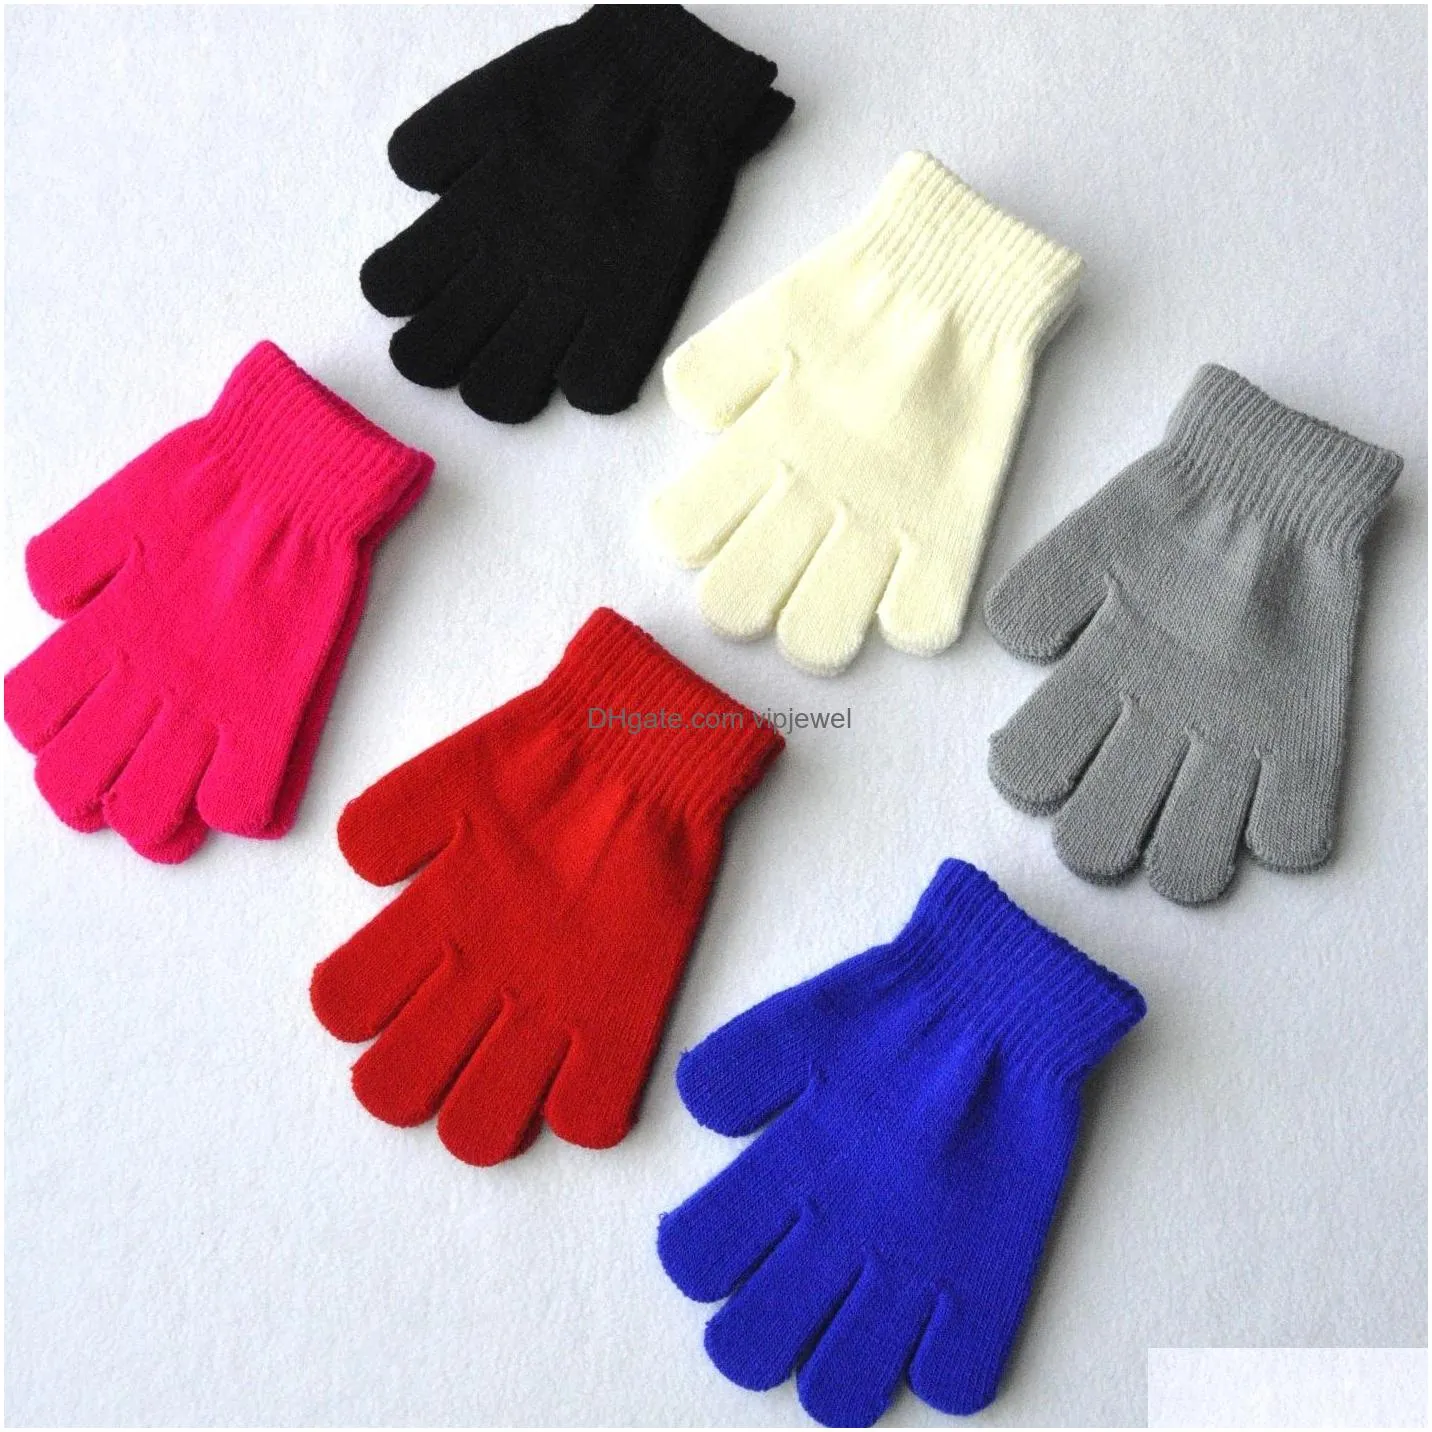 12 colors children winter solid gloves candy color boy girl knitting glove kid warm knitted finger stretch mitten student outdoor